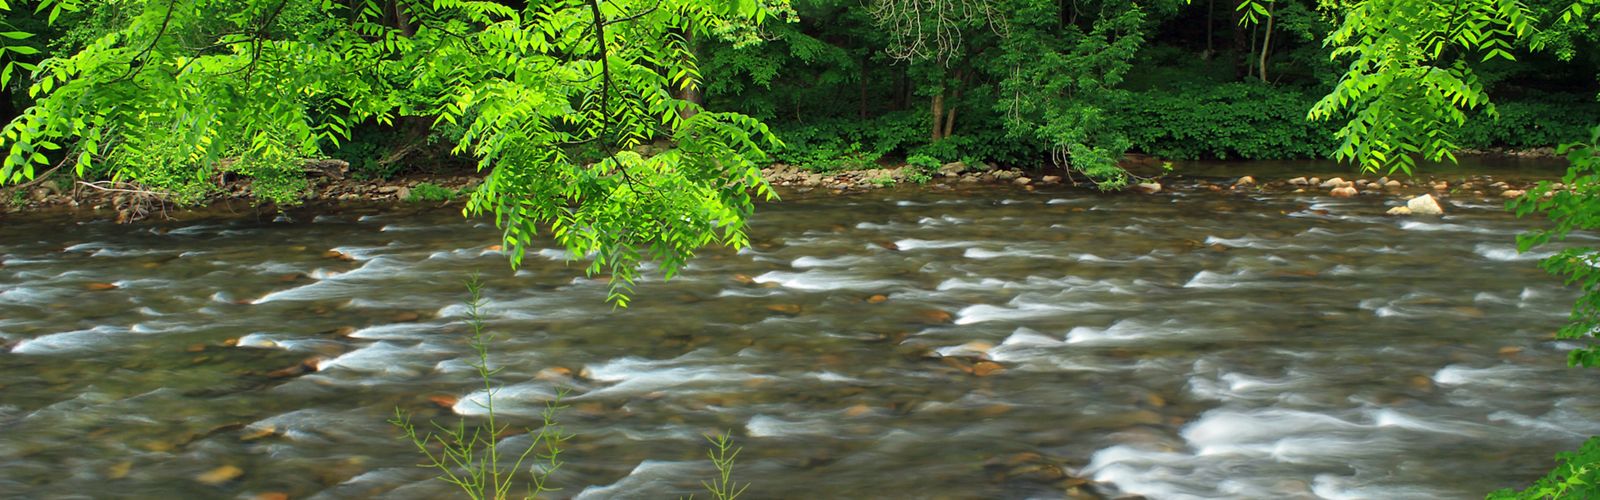 A river flowing surrounded by lush greenery.